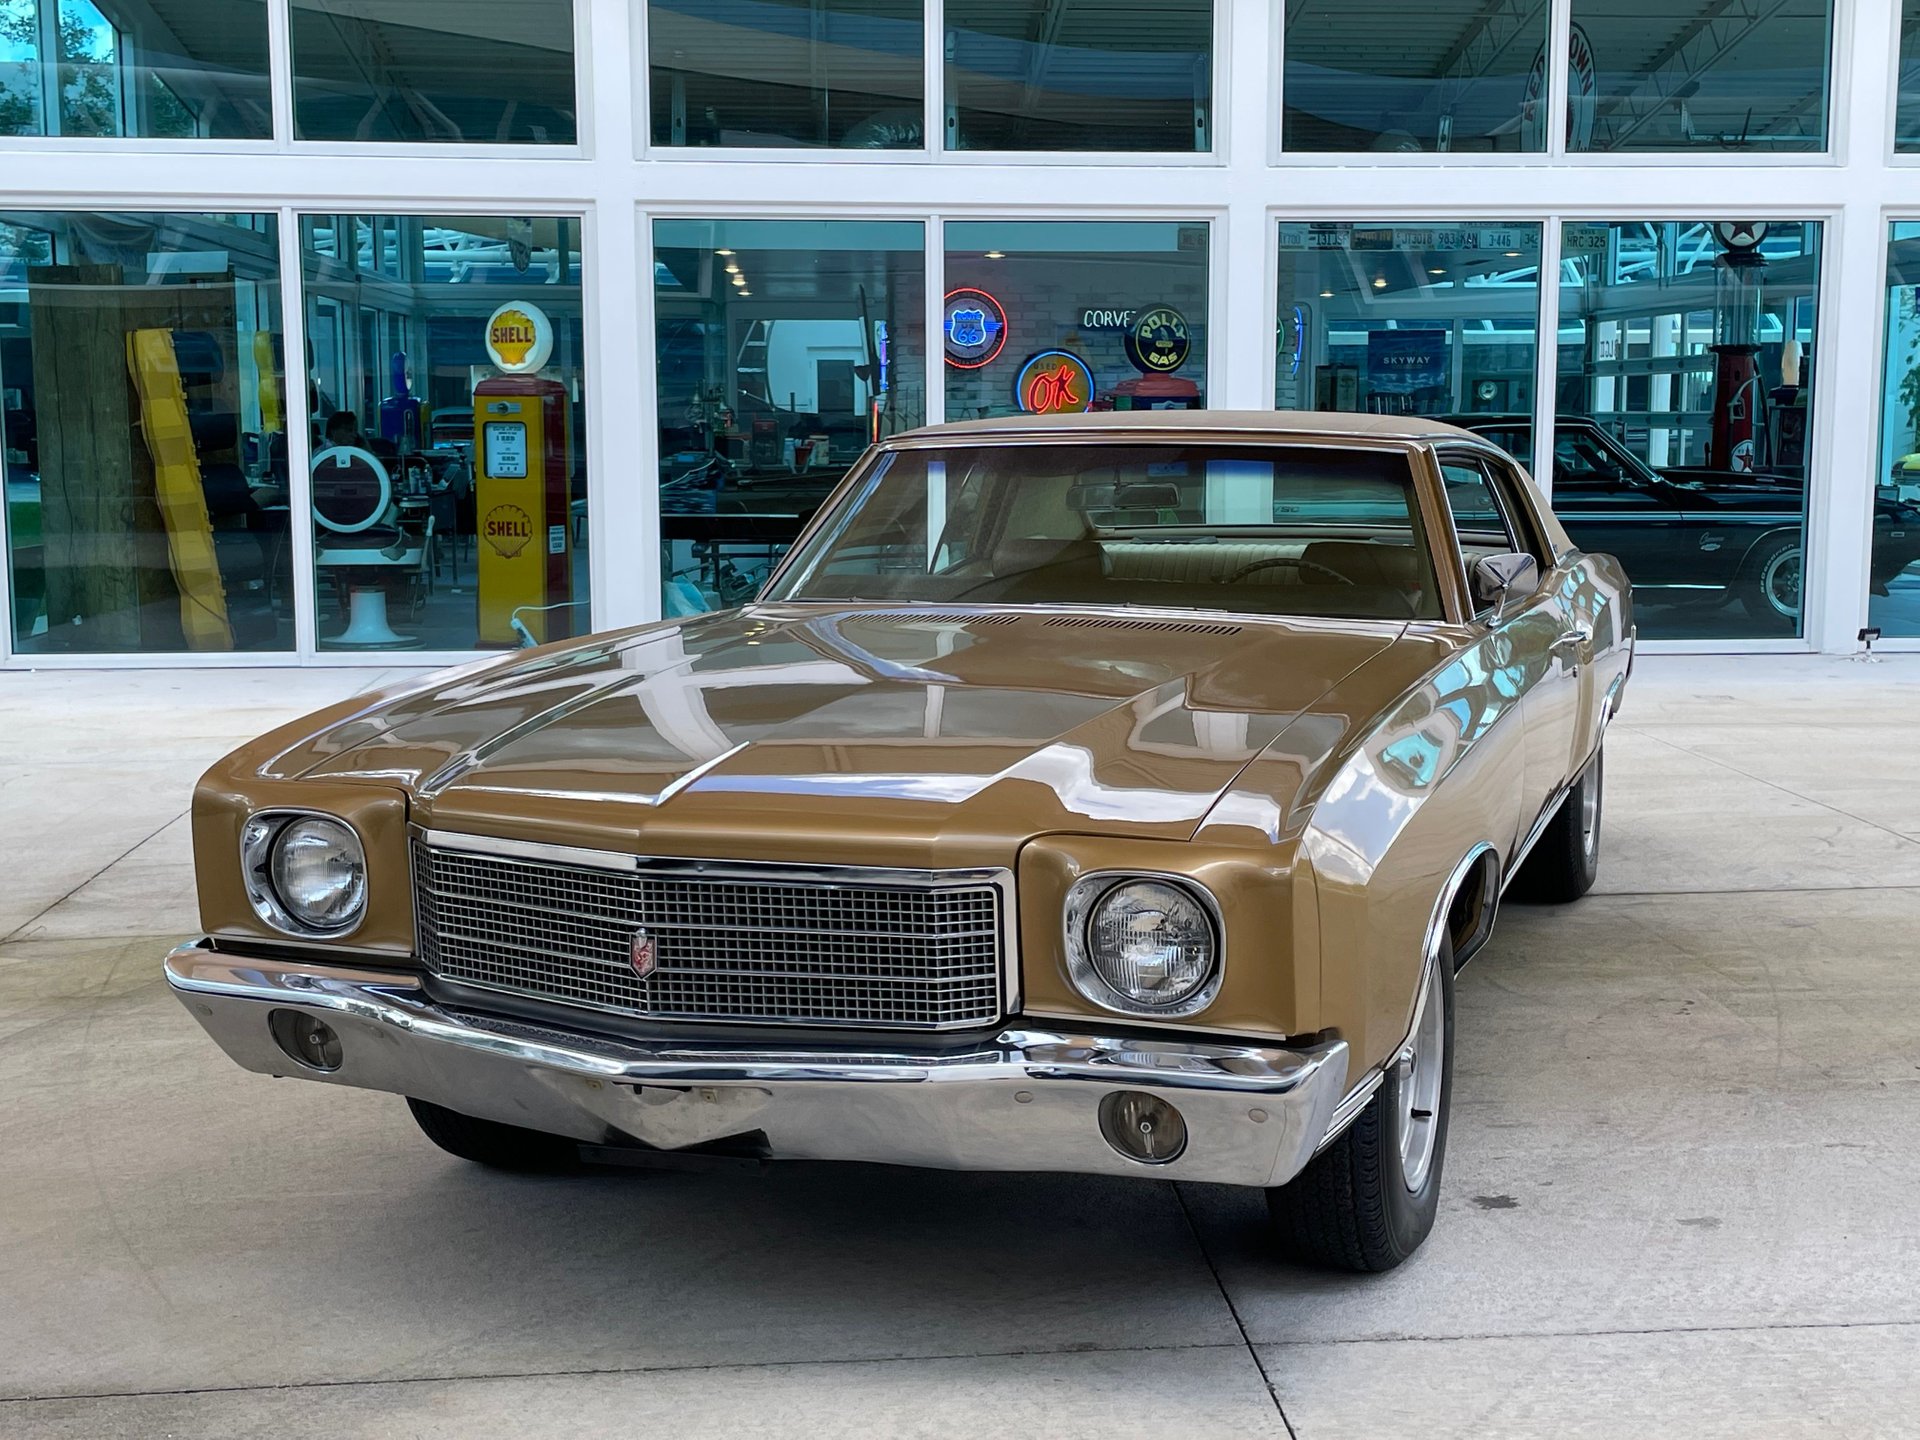 1970 Chevrolet Monte carlo | Classic Cars & Used Cars For Sale in Tampa, FL